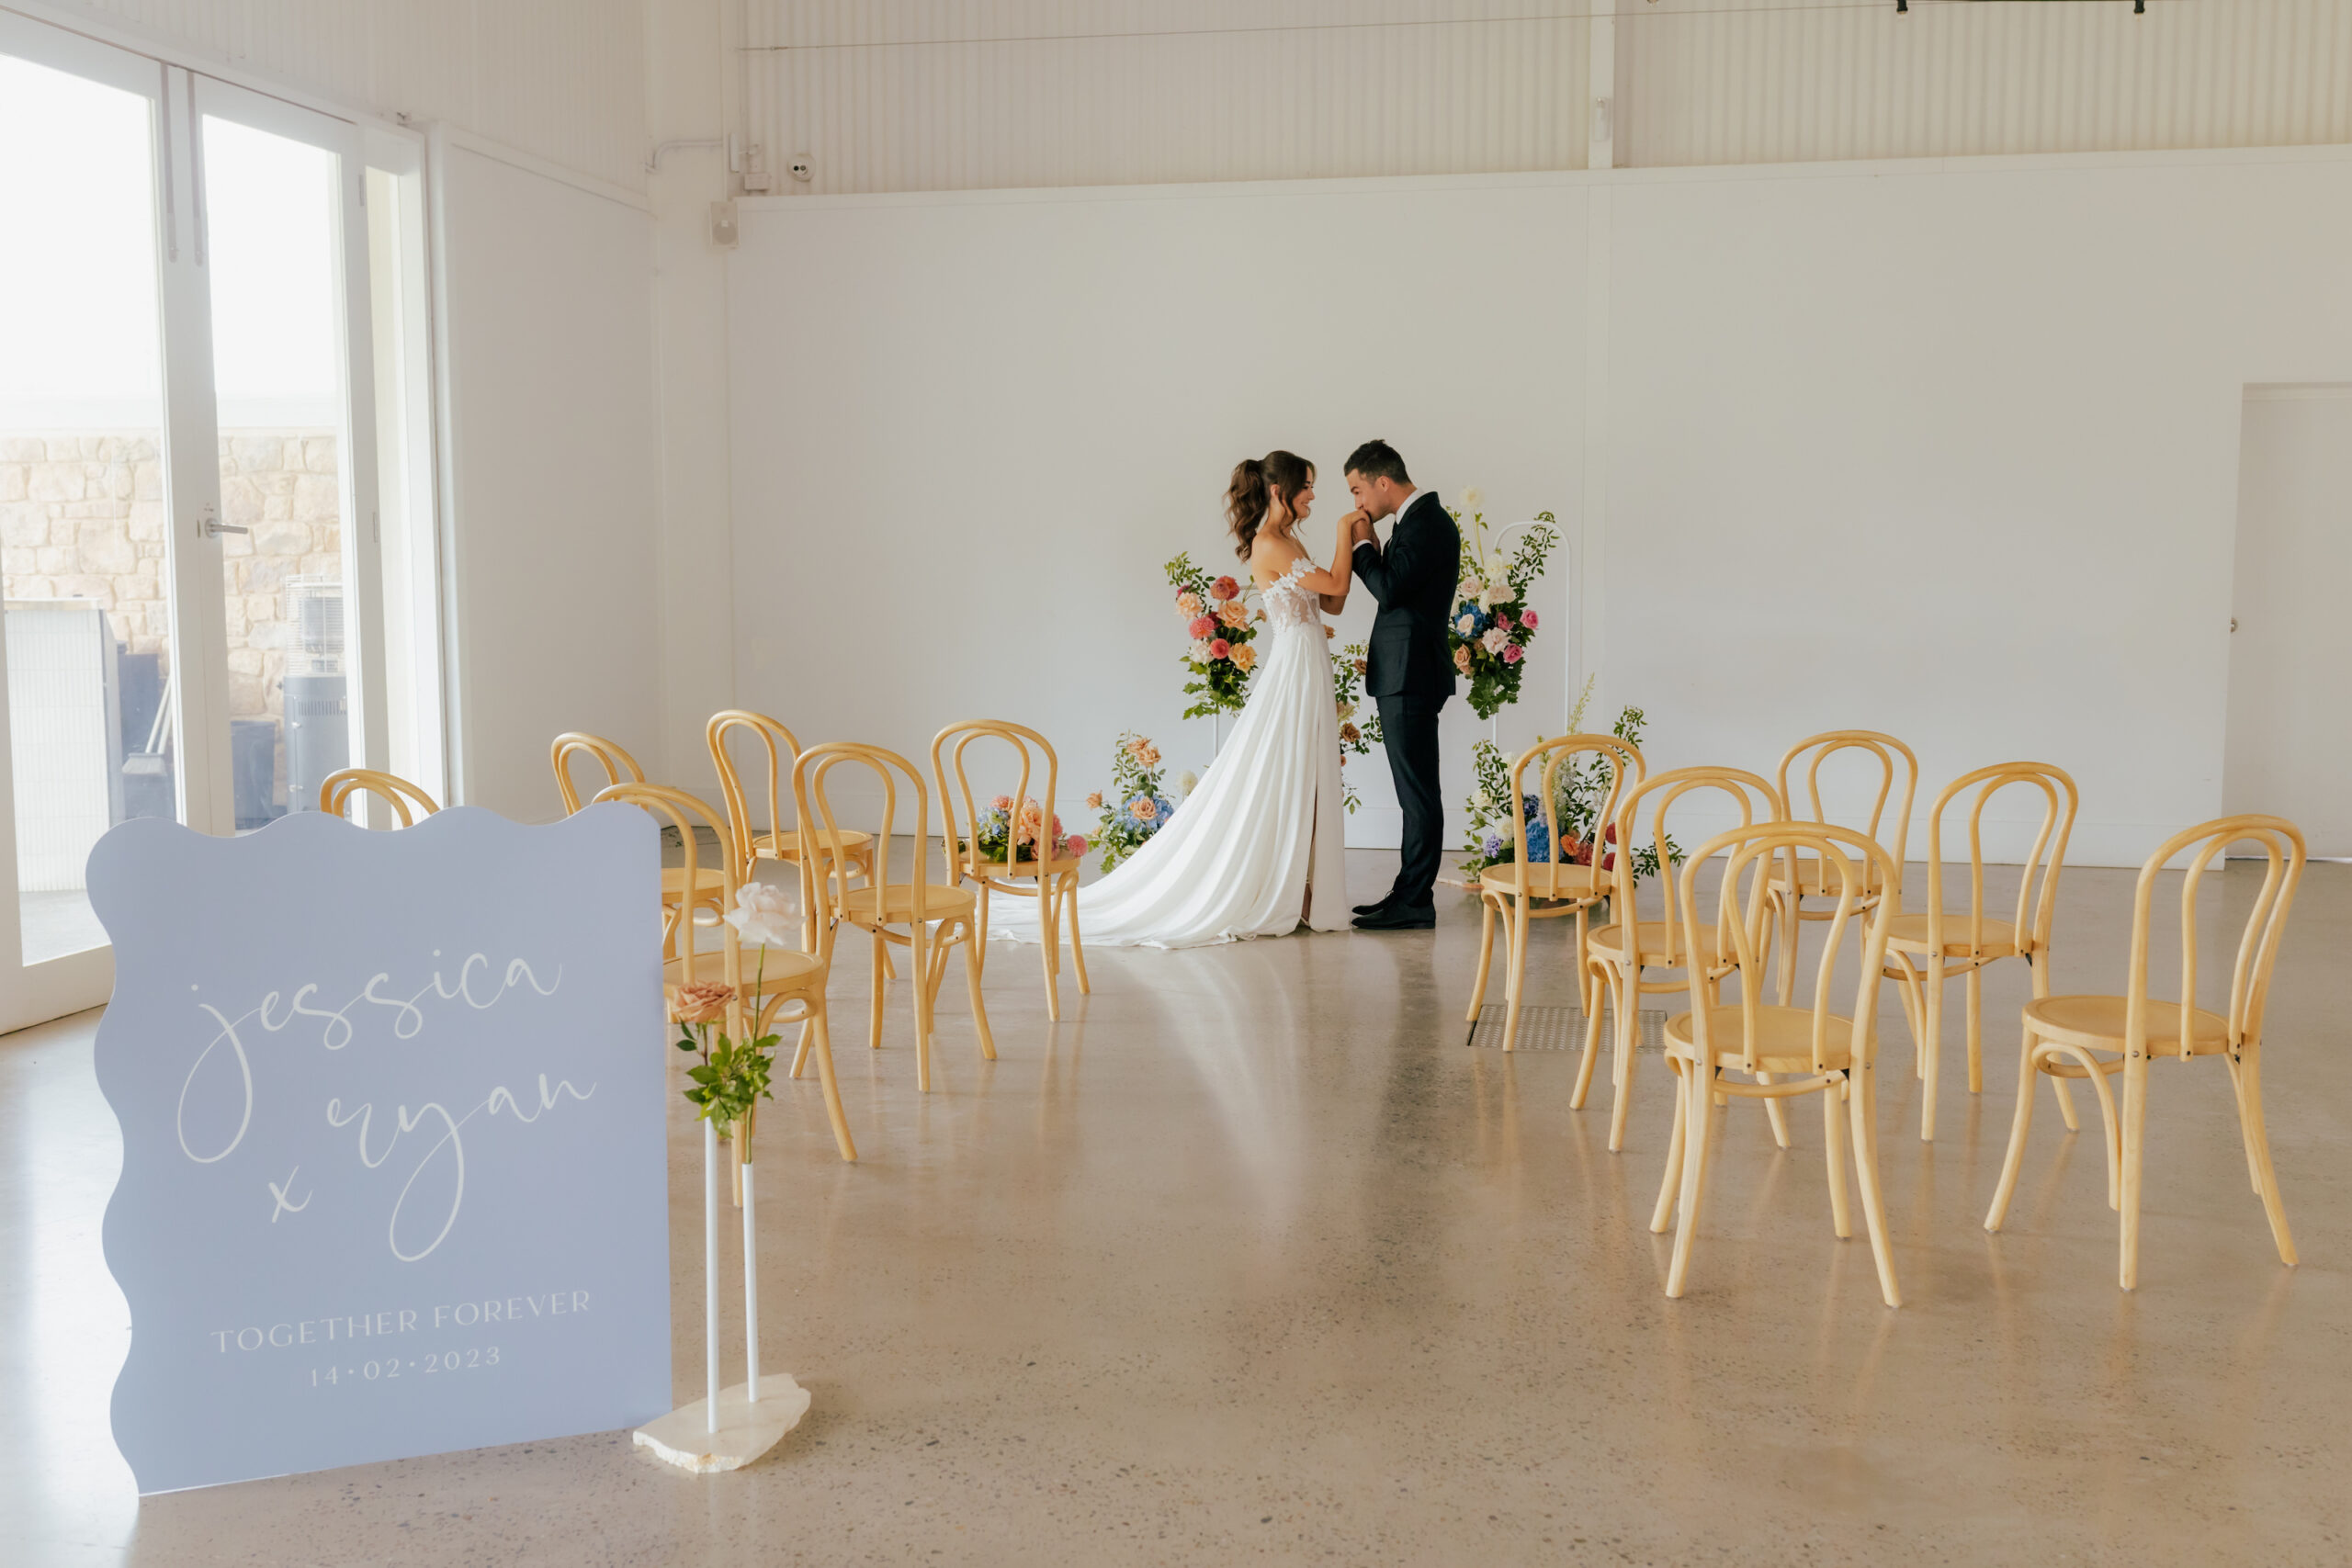 A slice of Tuscany hidden on the Fleurieu, Lloyd Brothers is a classic white, modern and fresh venue breathing fresh air into a sea of rustic nostalgia, hidden amongst the grapevines and olive trees of McLaren Vale.